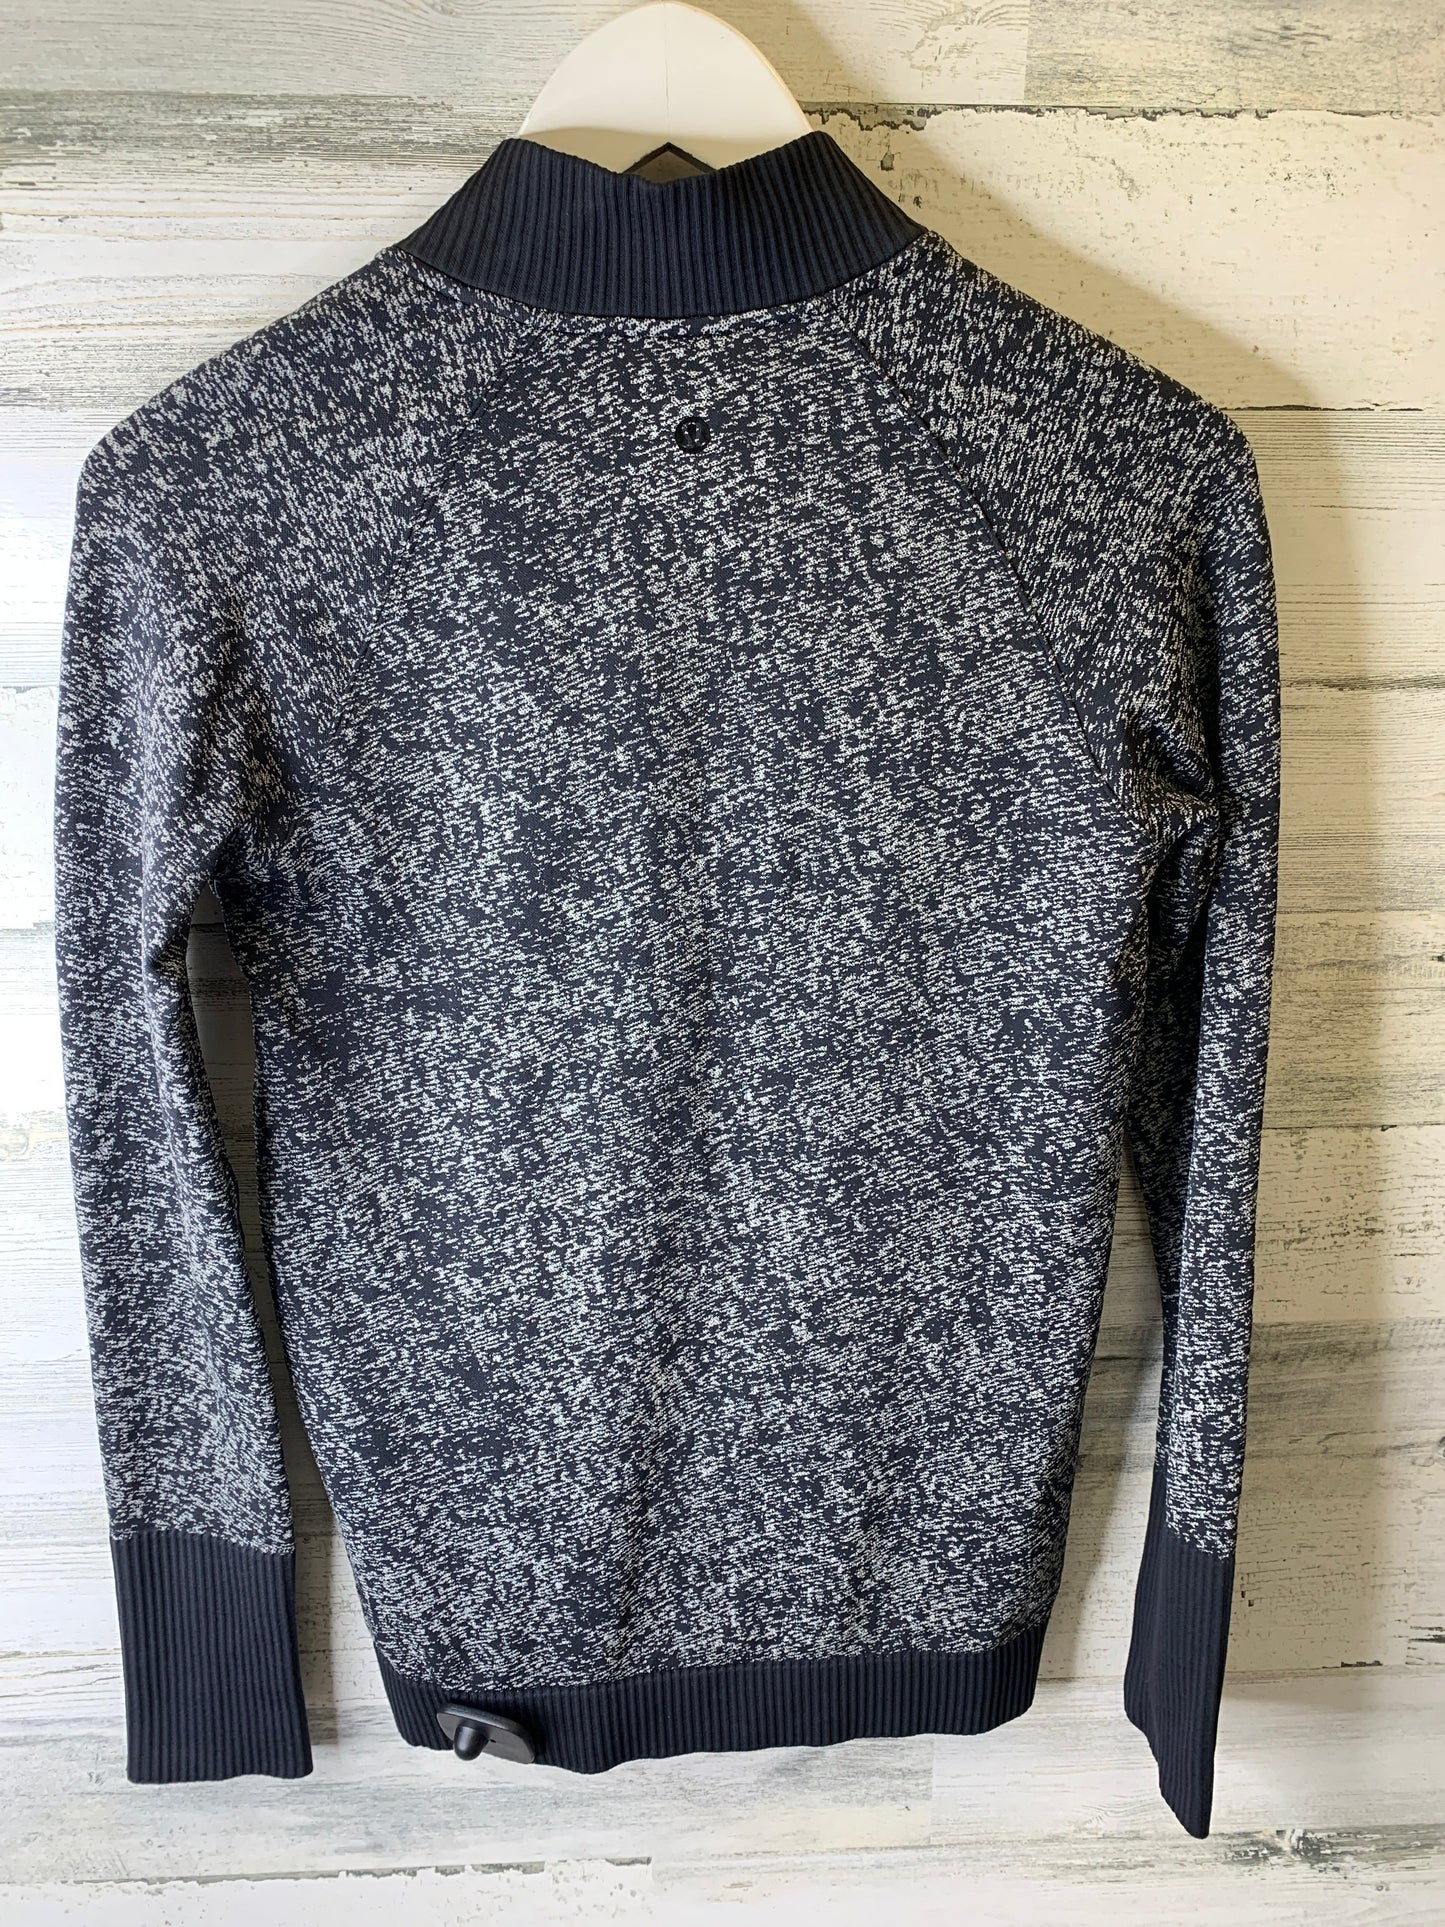 Athletic Top Long Sleeve Collar By Lululemon  Size: 4